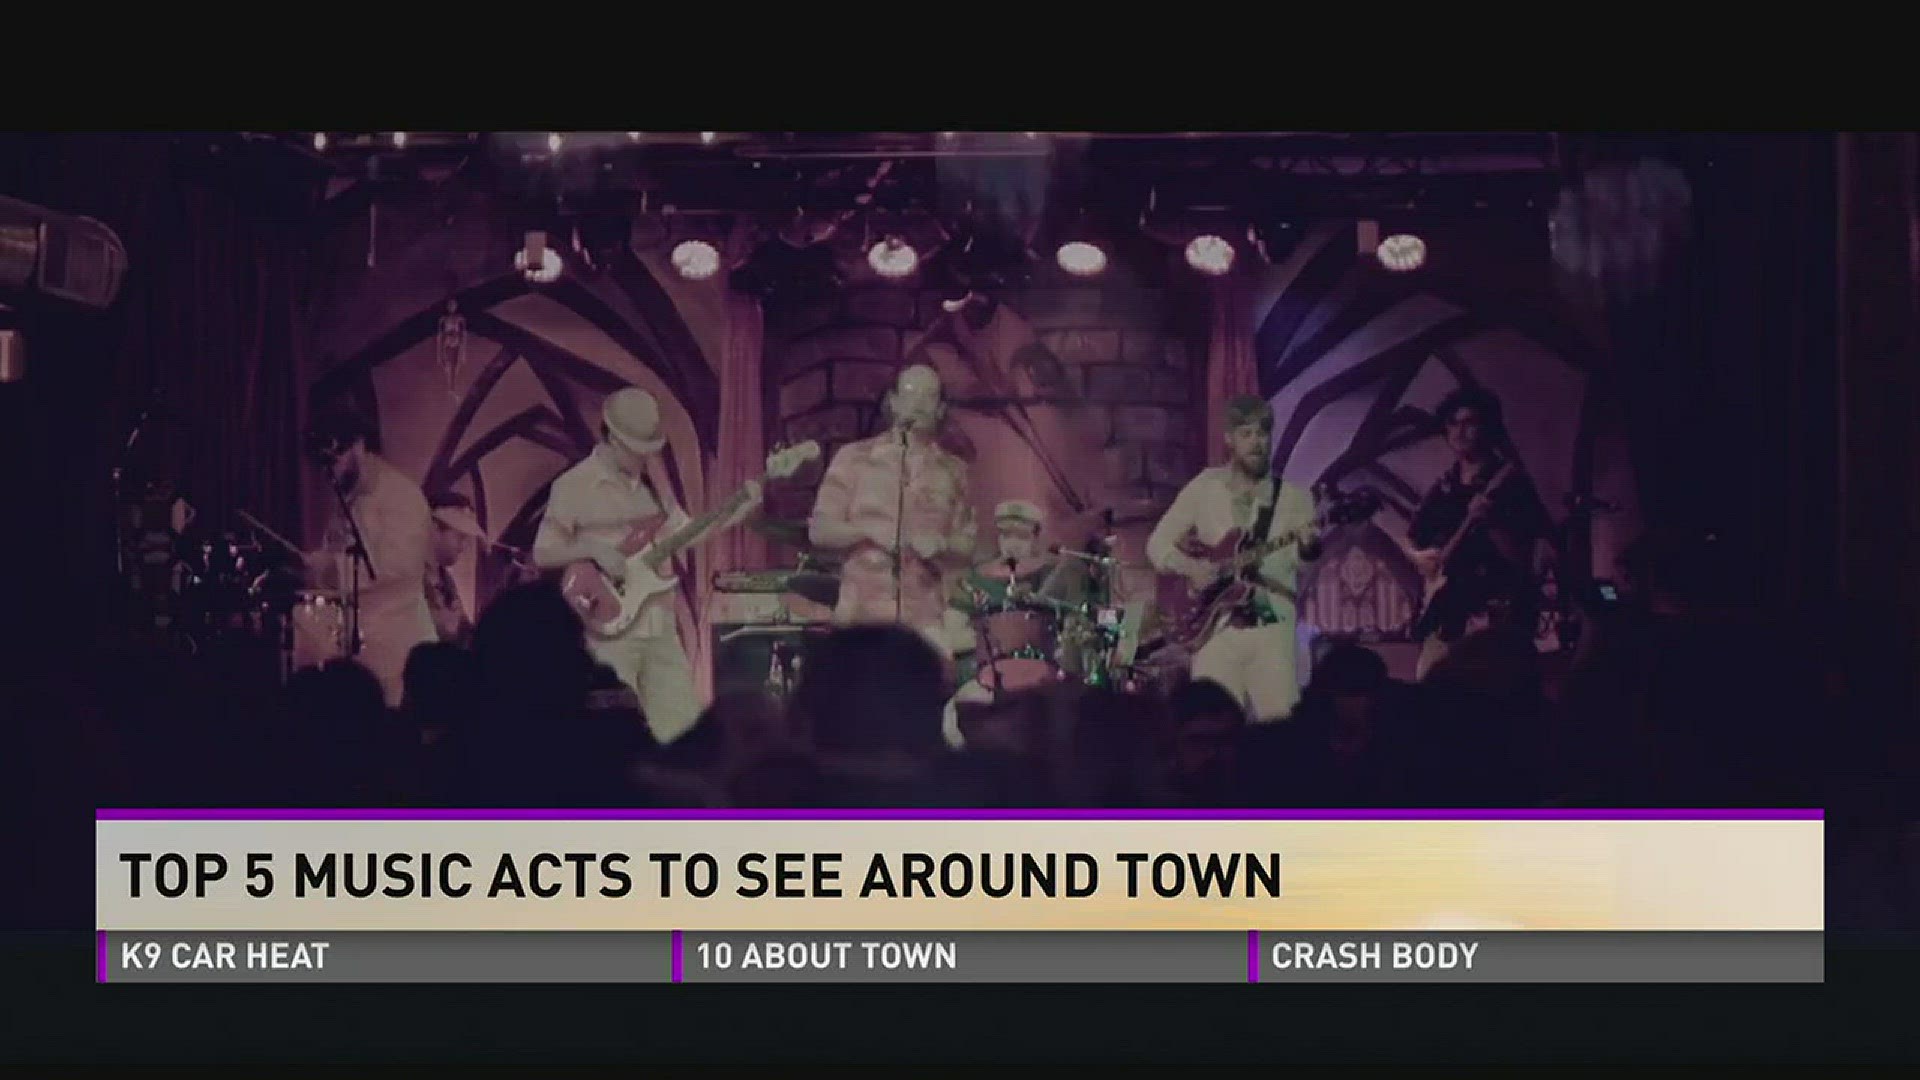 Top 5 Music Acts to See Around Town